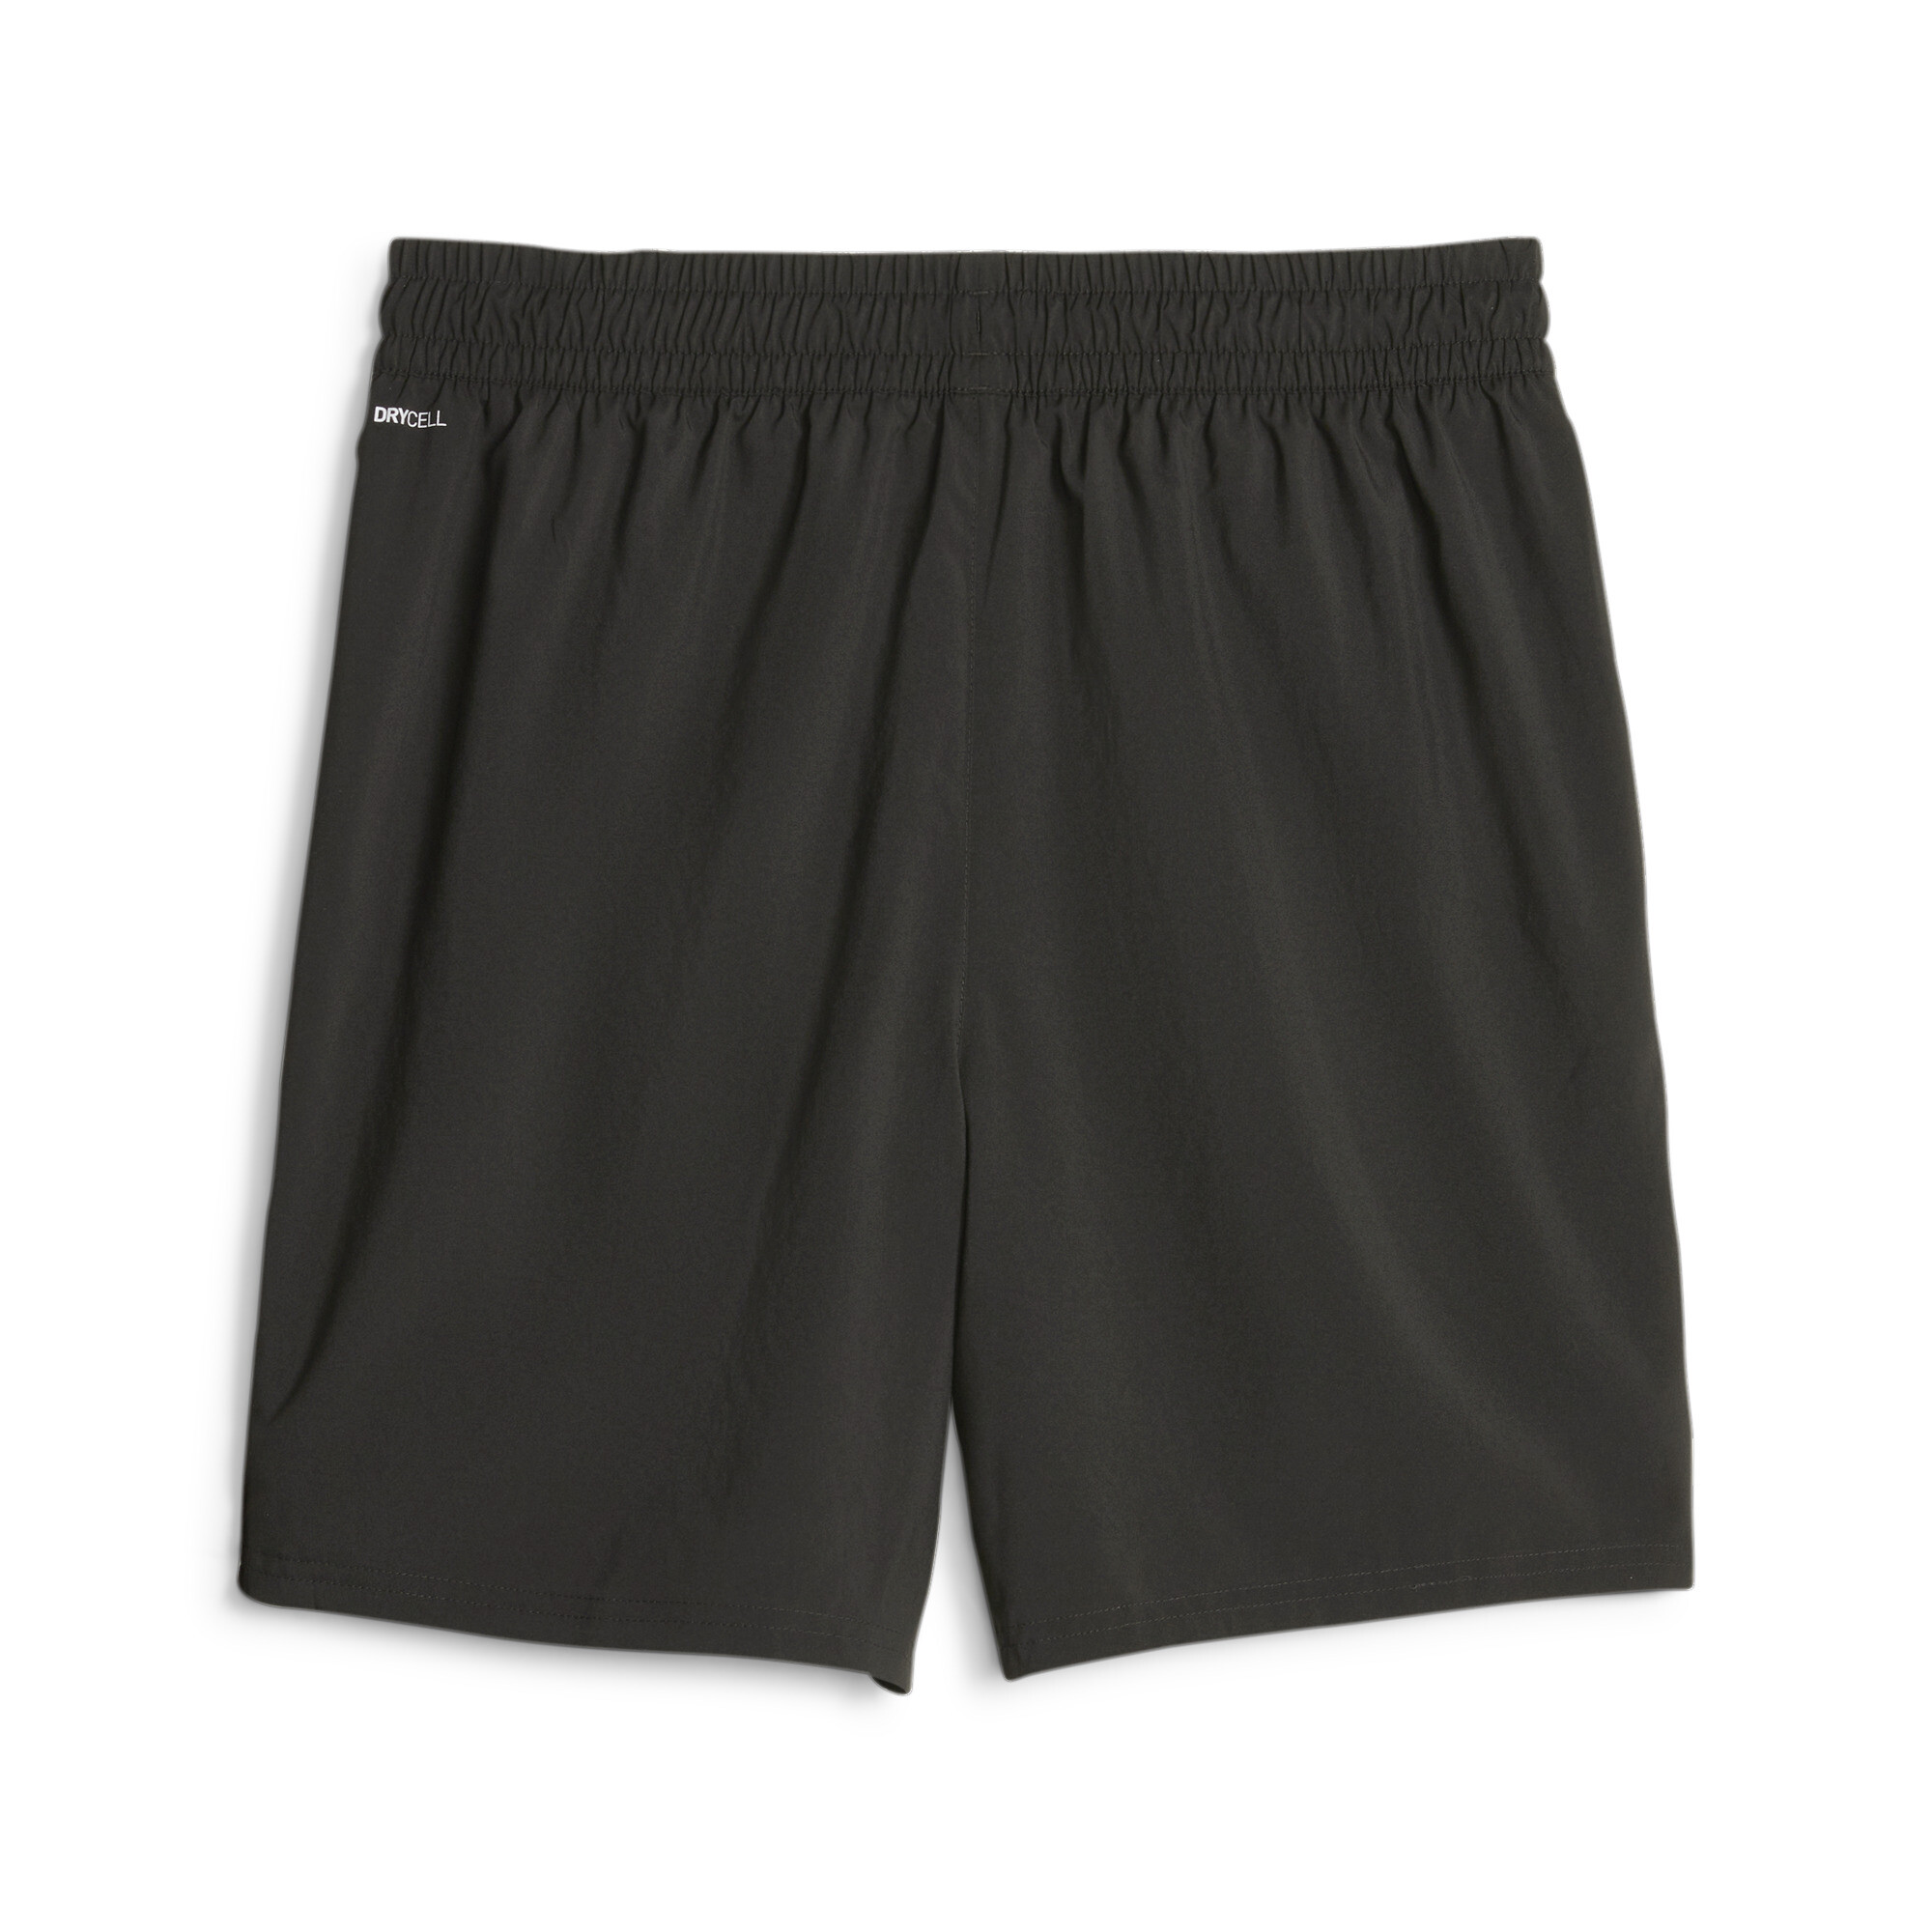 Men's PUMA Fit 7 Training Shorts In Black, Size Small